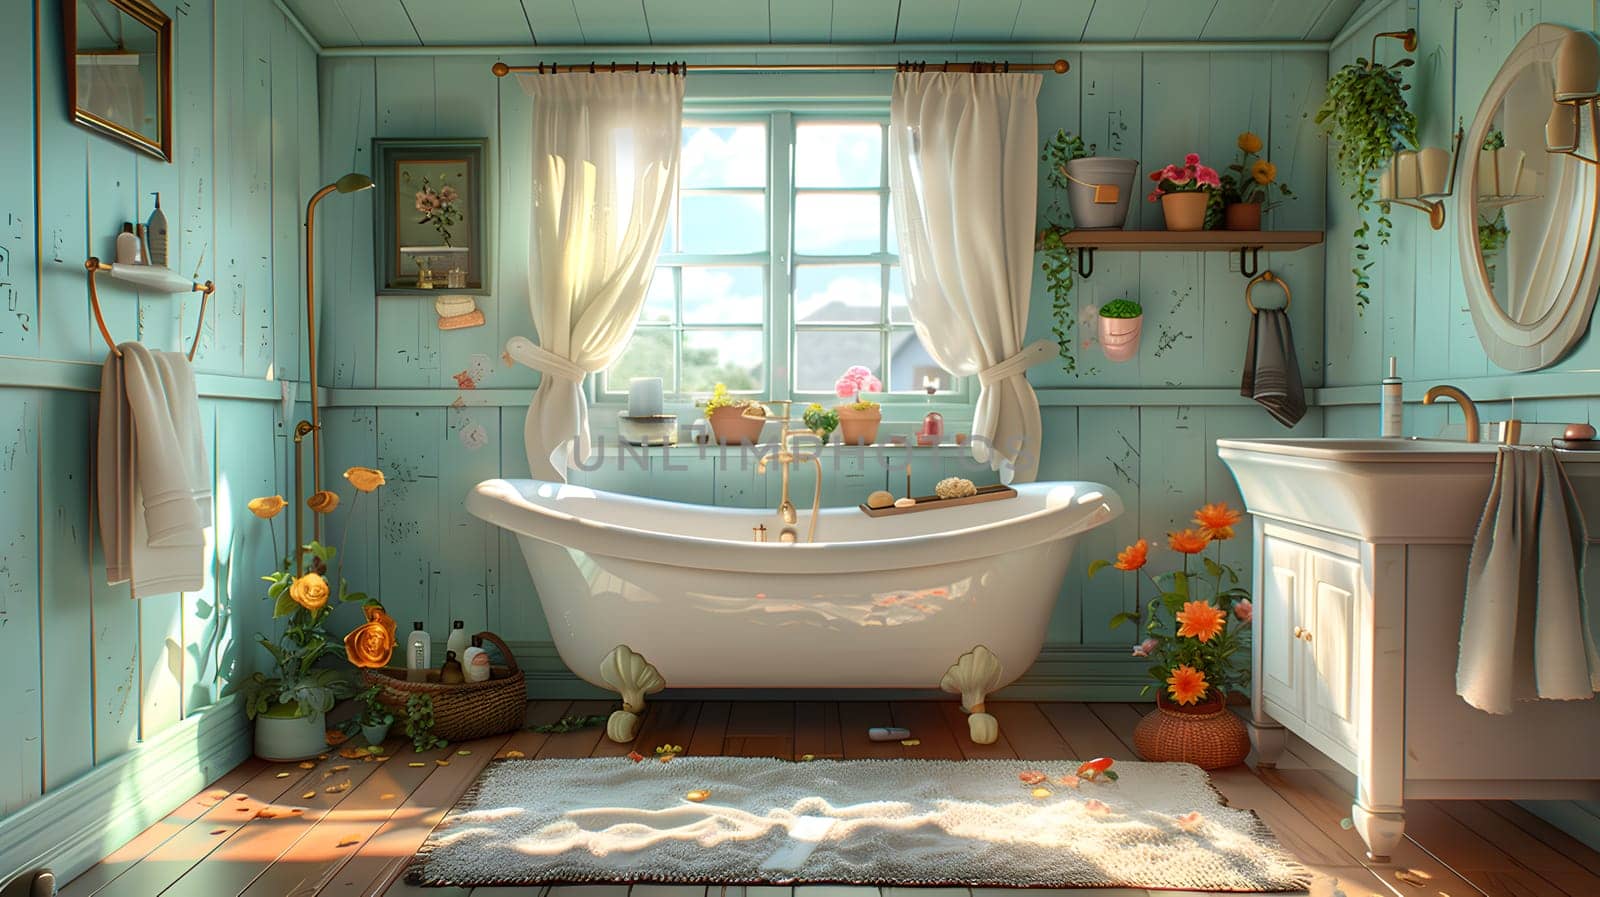 A bathroom with a bathtub, sink, mirror, and window, showcasing azure walls and a plant for a touch of nature. The interior design features fixtures, flowers, and a shiny floor